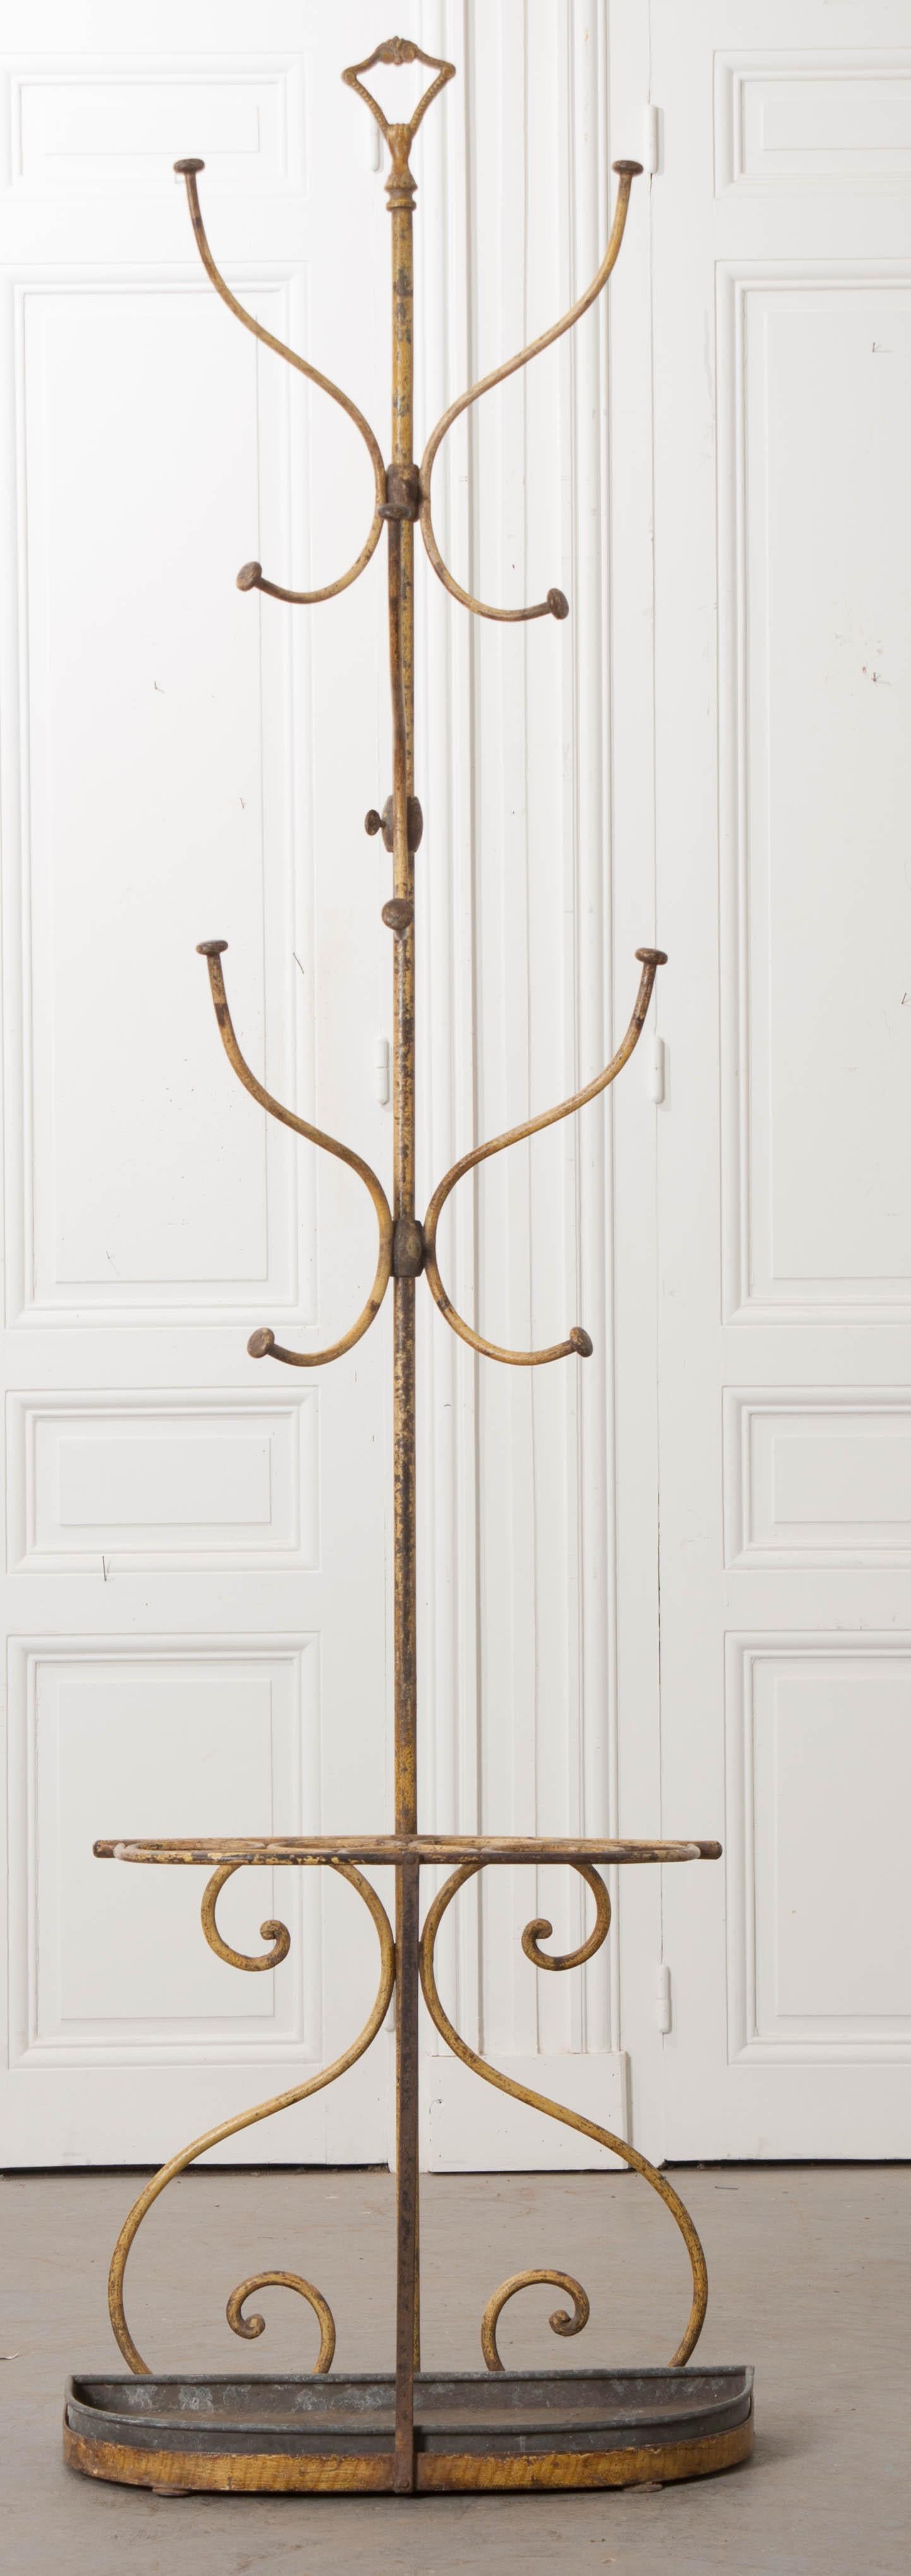 An outstanding metal hall tree, painted yellow, from 1900s France. The antique is made of cast iron, in restrained scrolled form. Five adjustable hooks provide places for hats, coats, and scarves, while space for up to seven umbrellas or parasols.